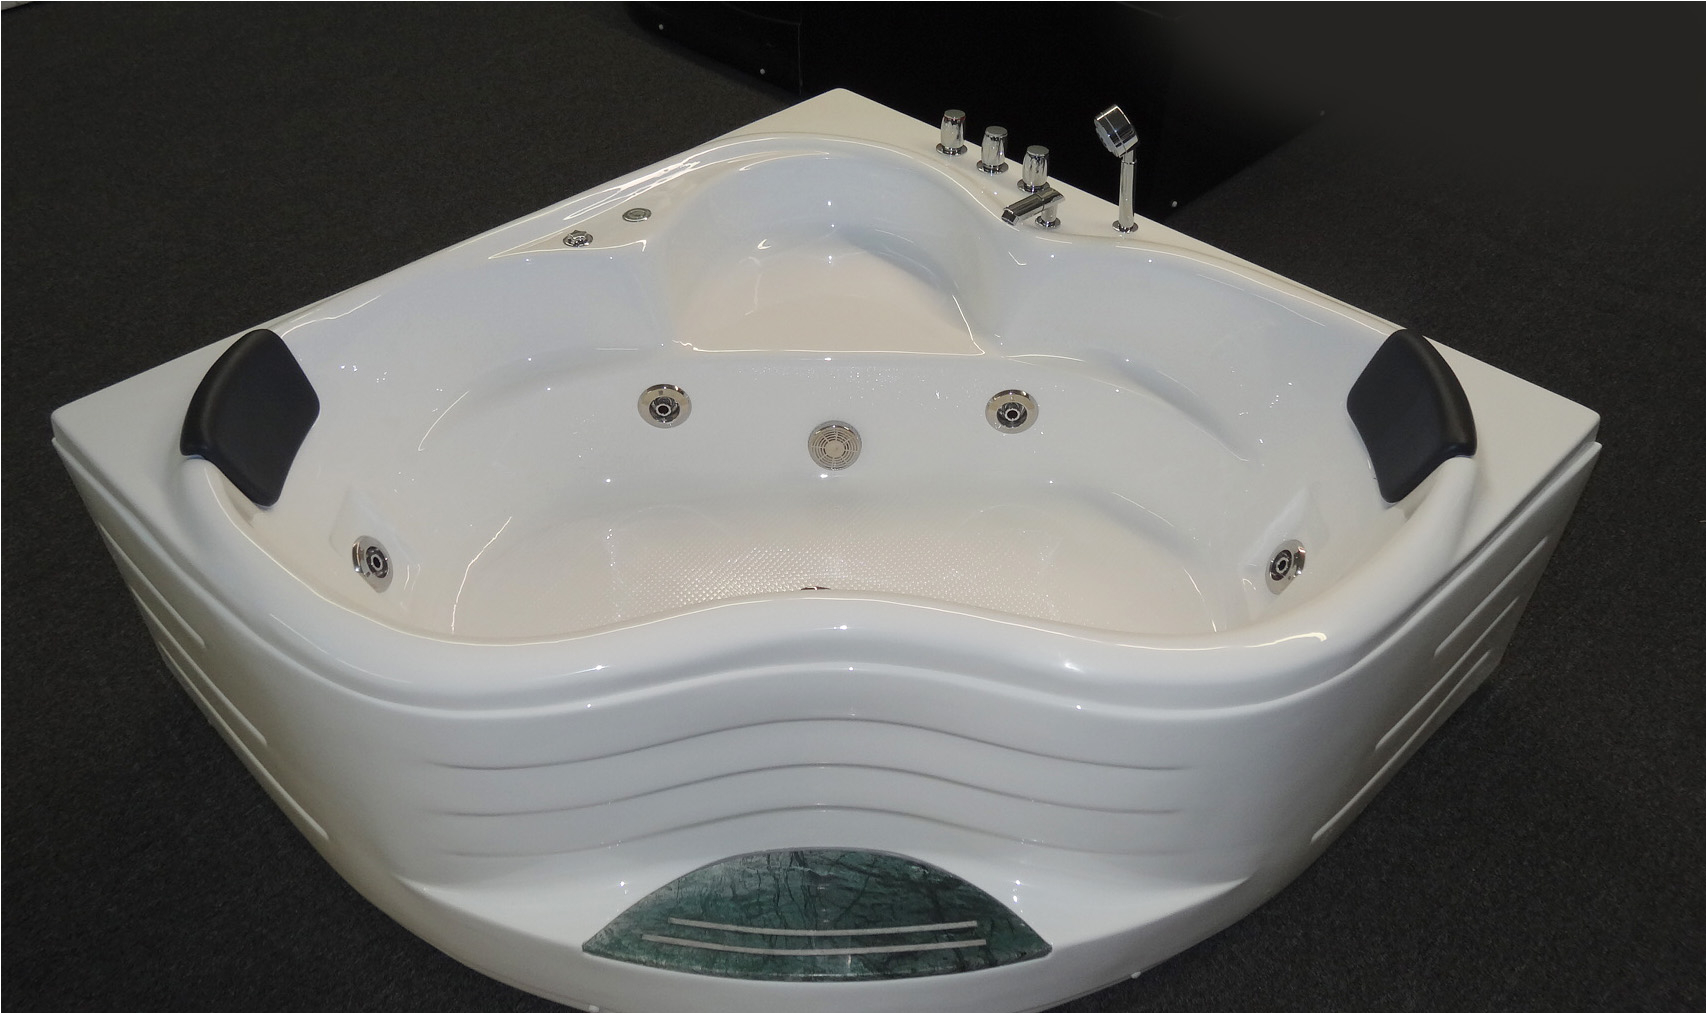 Best Bathtubs with Jets Corner Jetted Bathtub for 2 Person B226 Sale Best for Bath